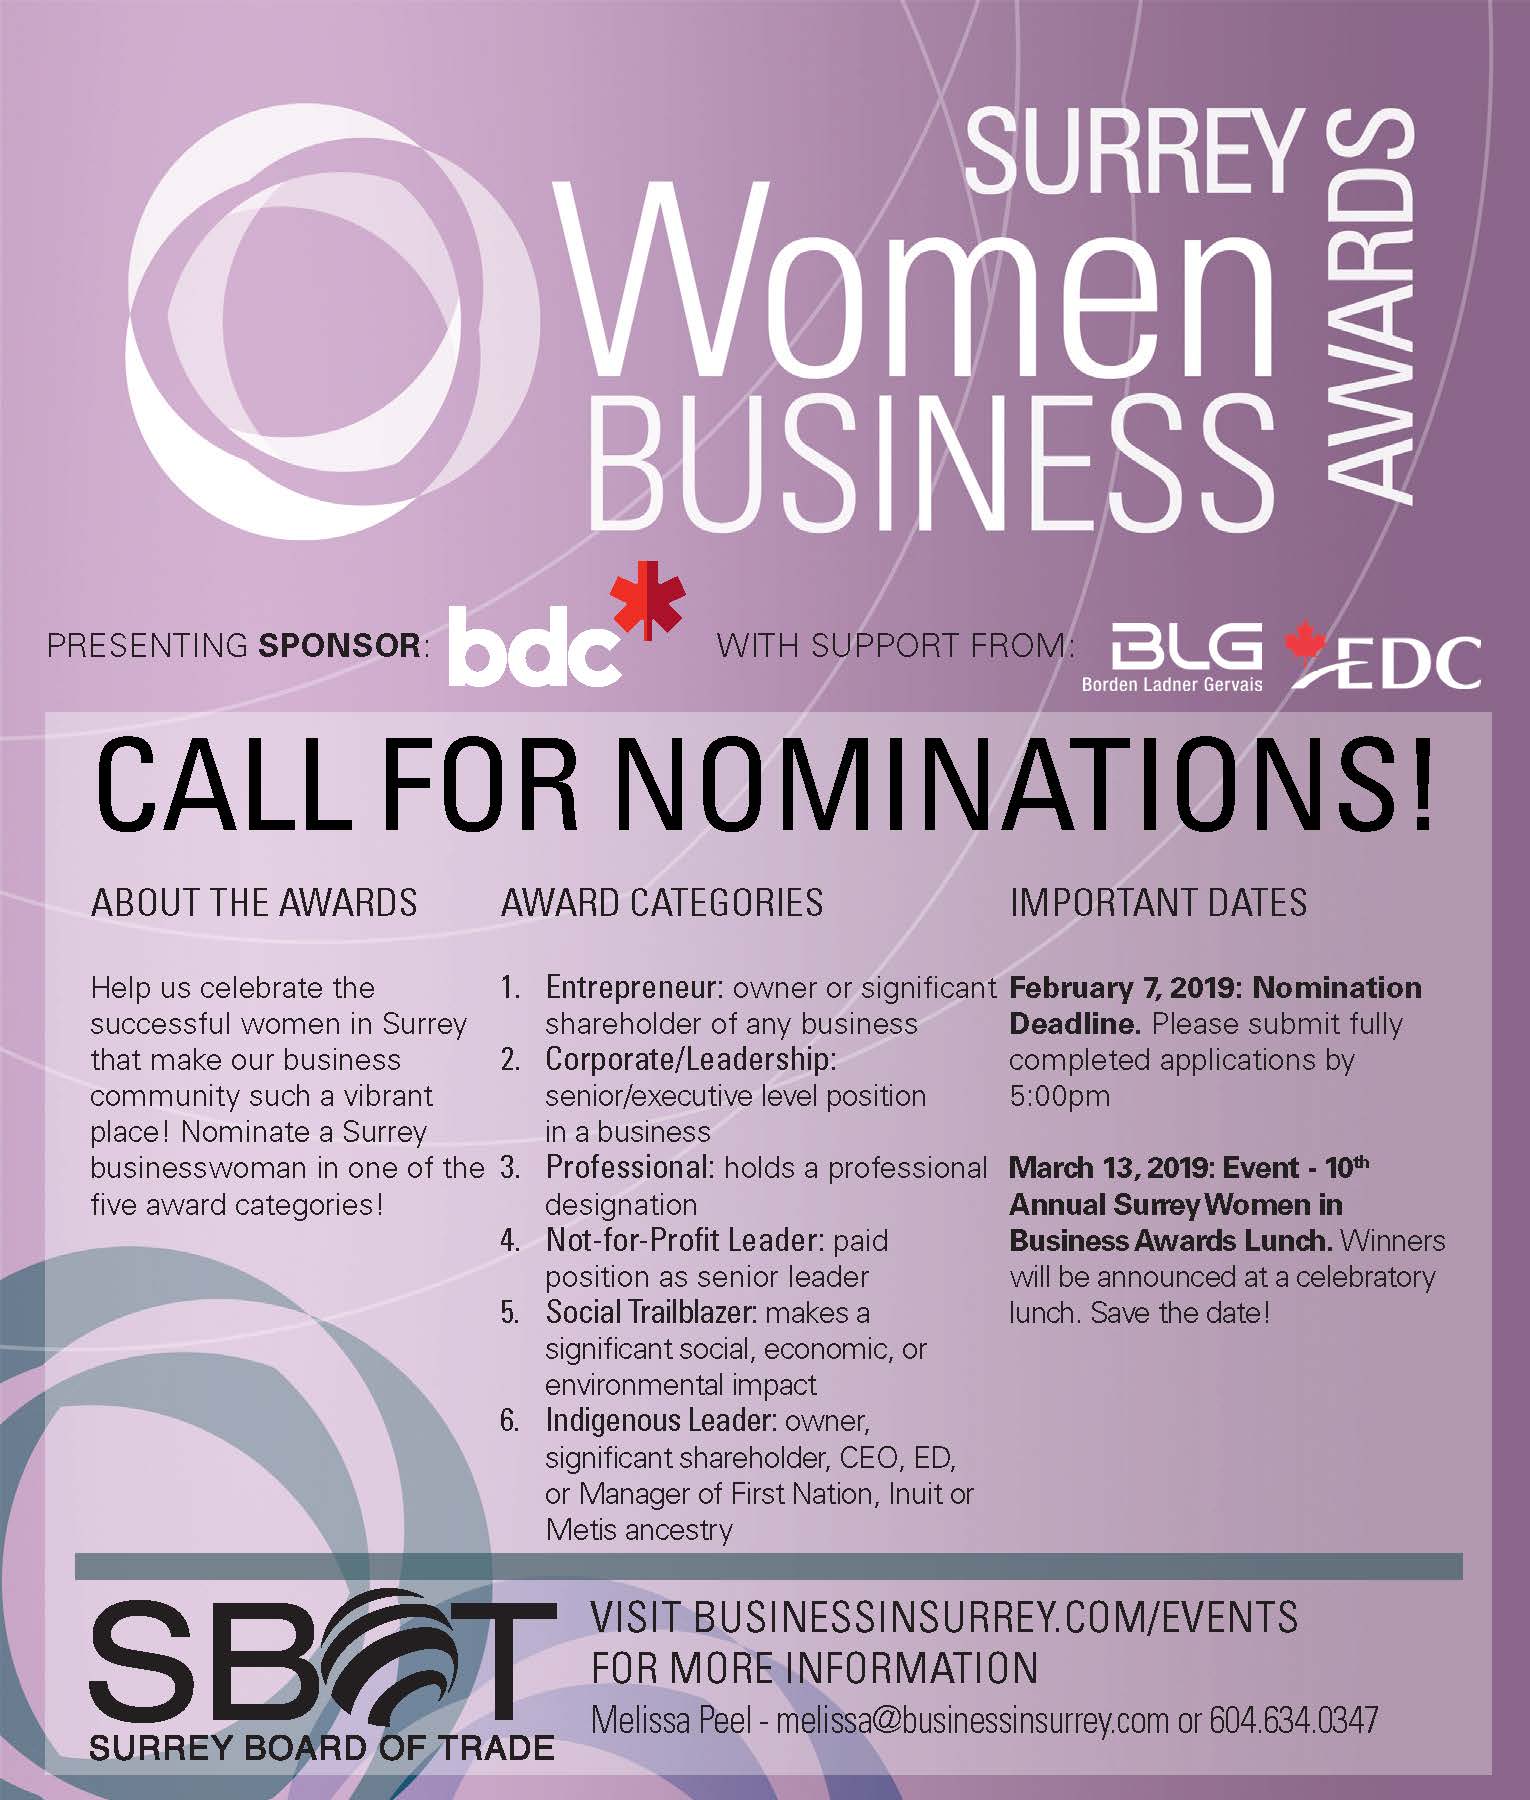 Surrey Women in Business Awards Accepting Nominations